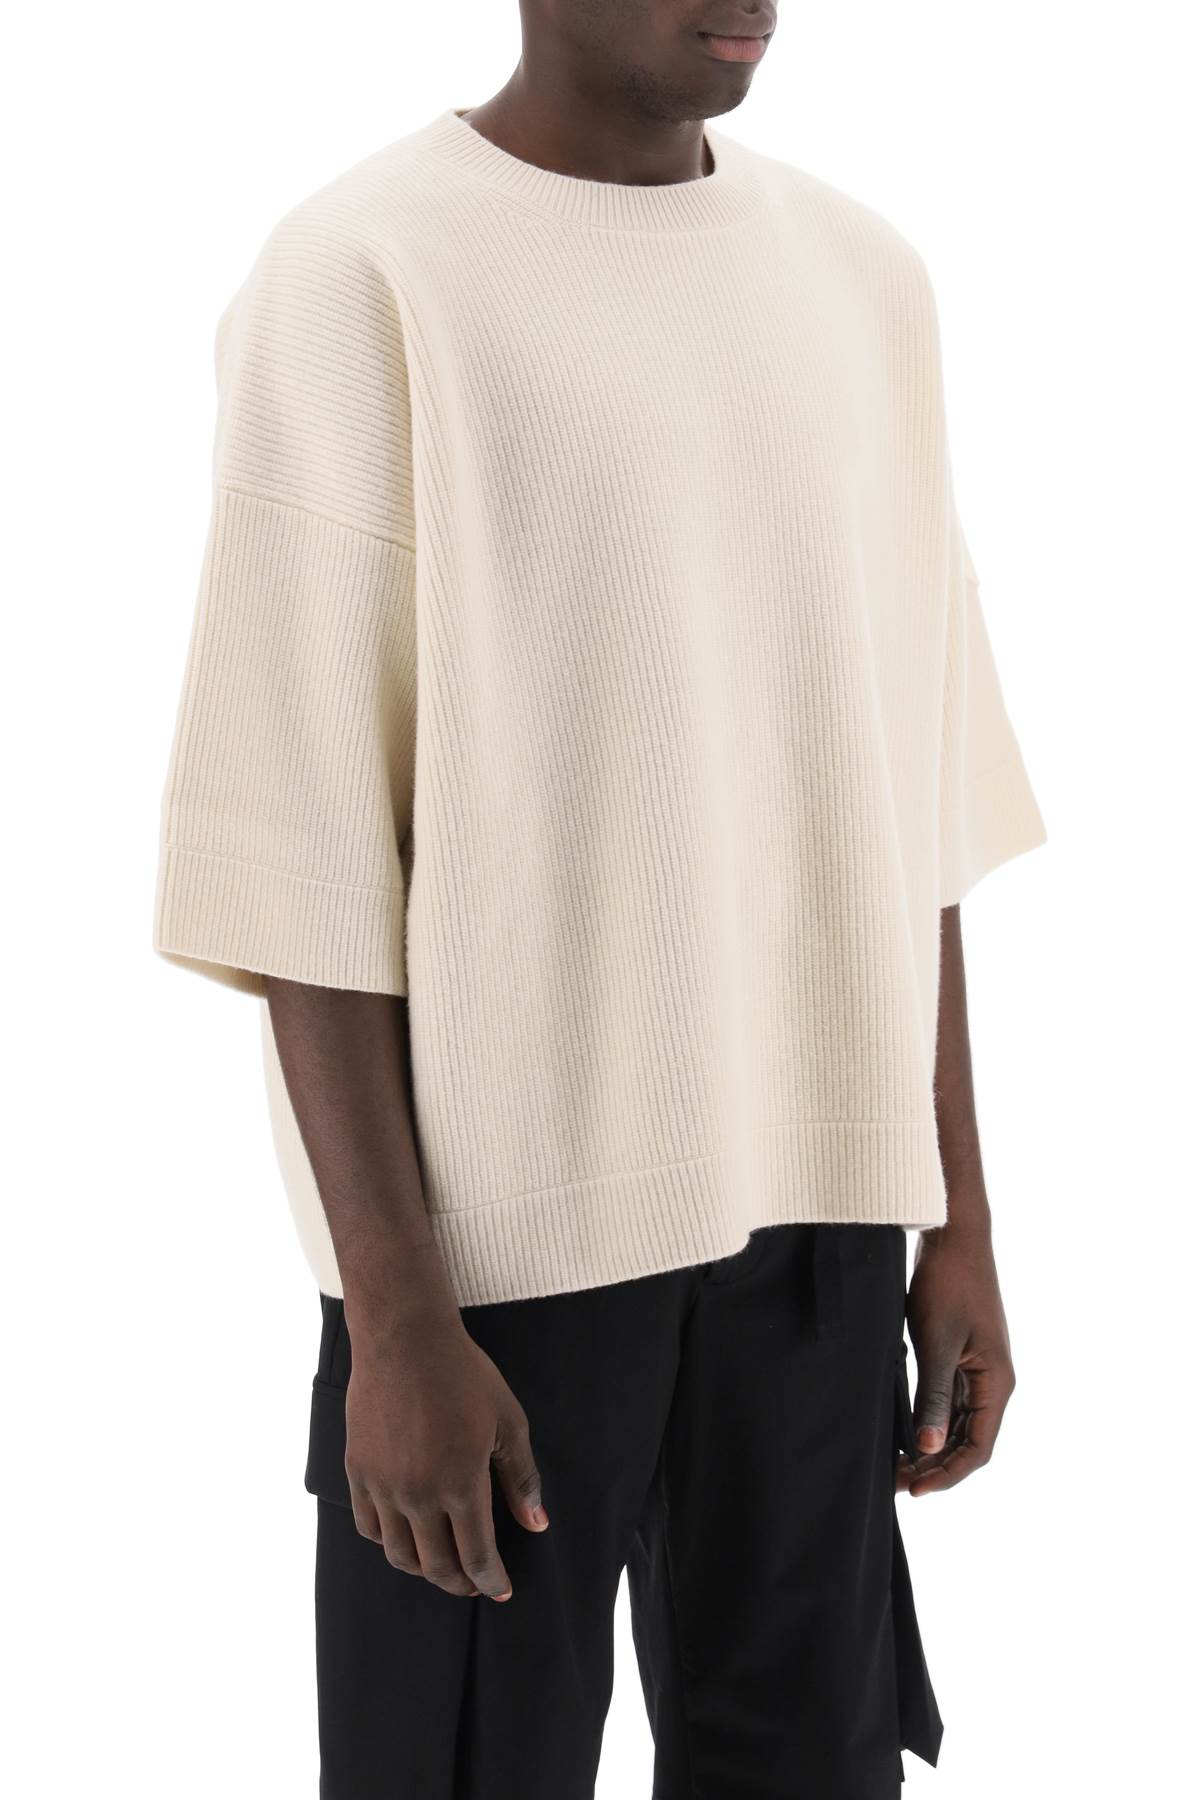 MONCLER X ROC NATION BY JAY Z Men's White Wool Jumper with Brioche Stitch and Oversized Fit for FW24